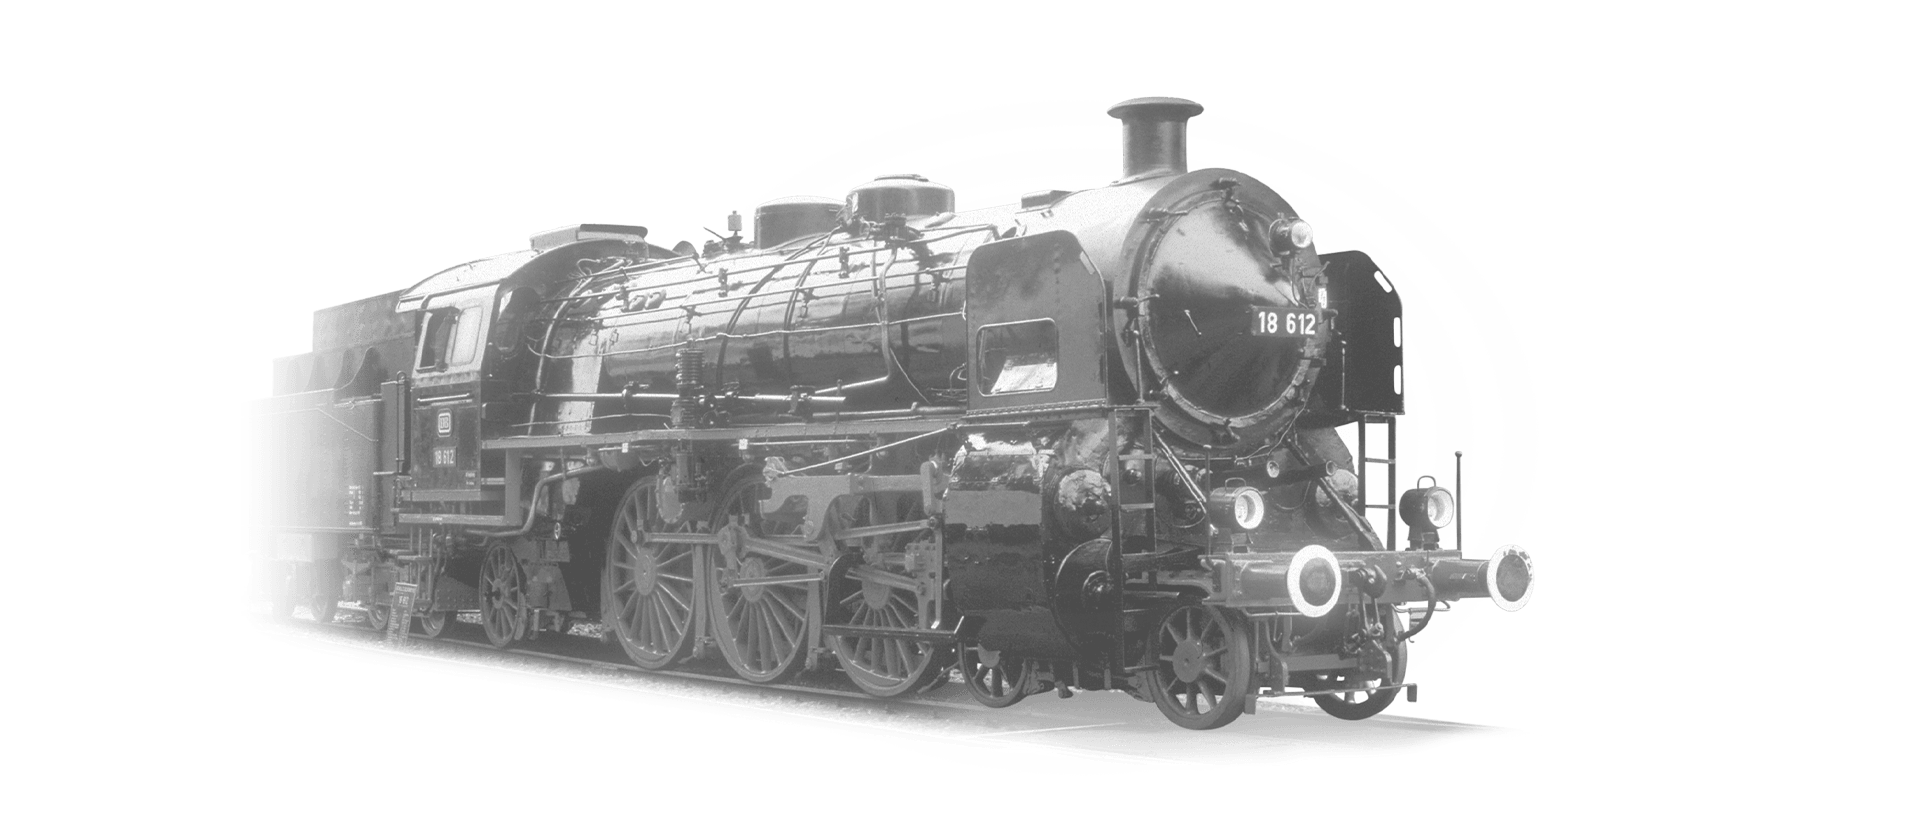 The locomotive 18-612 is coming towards the camera in black and white